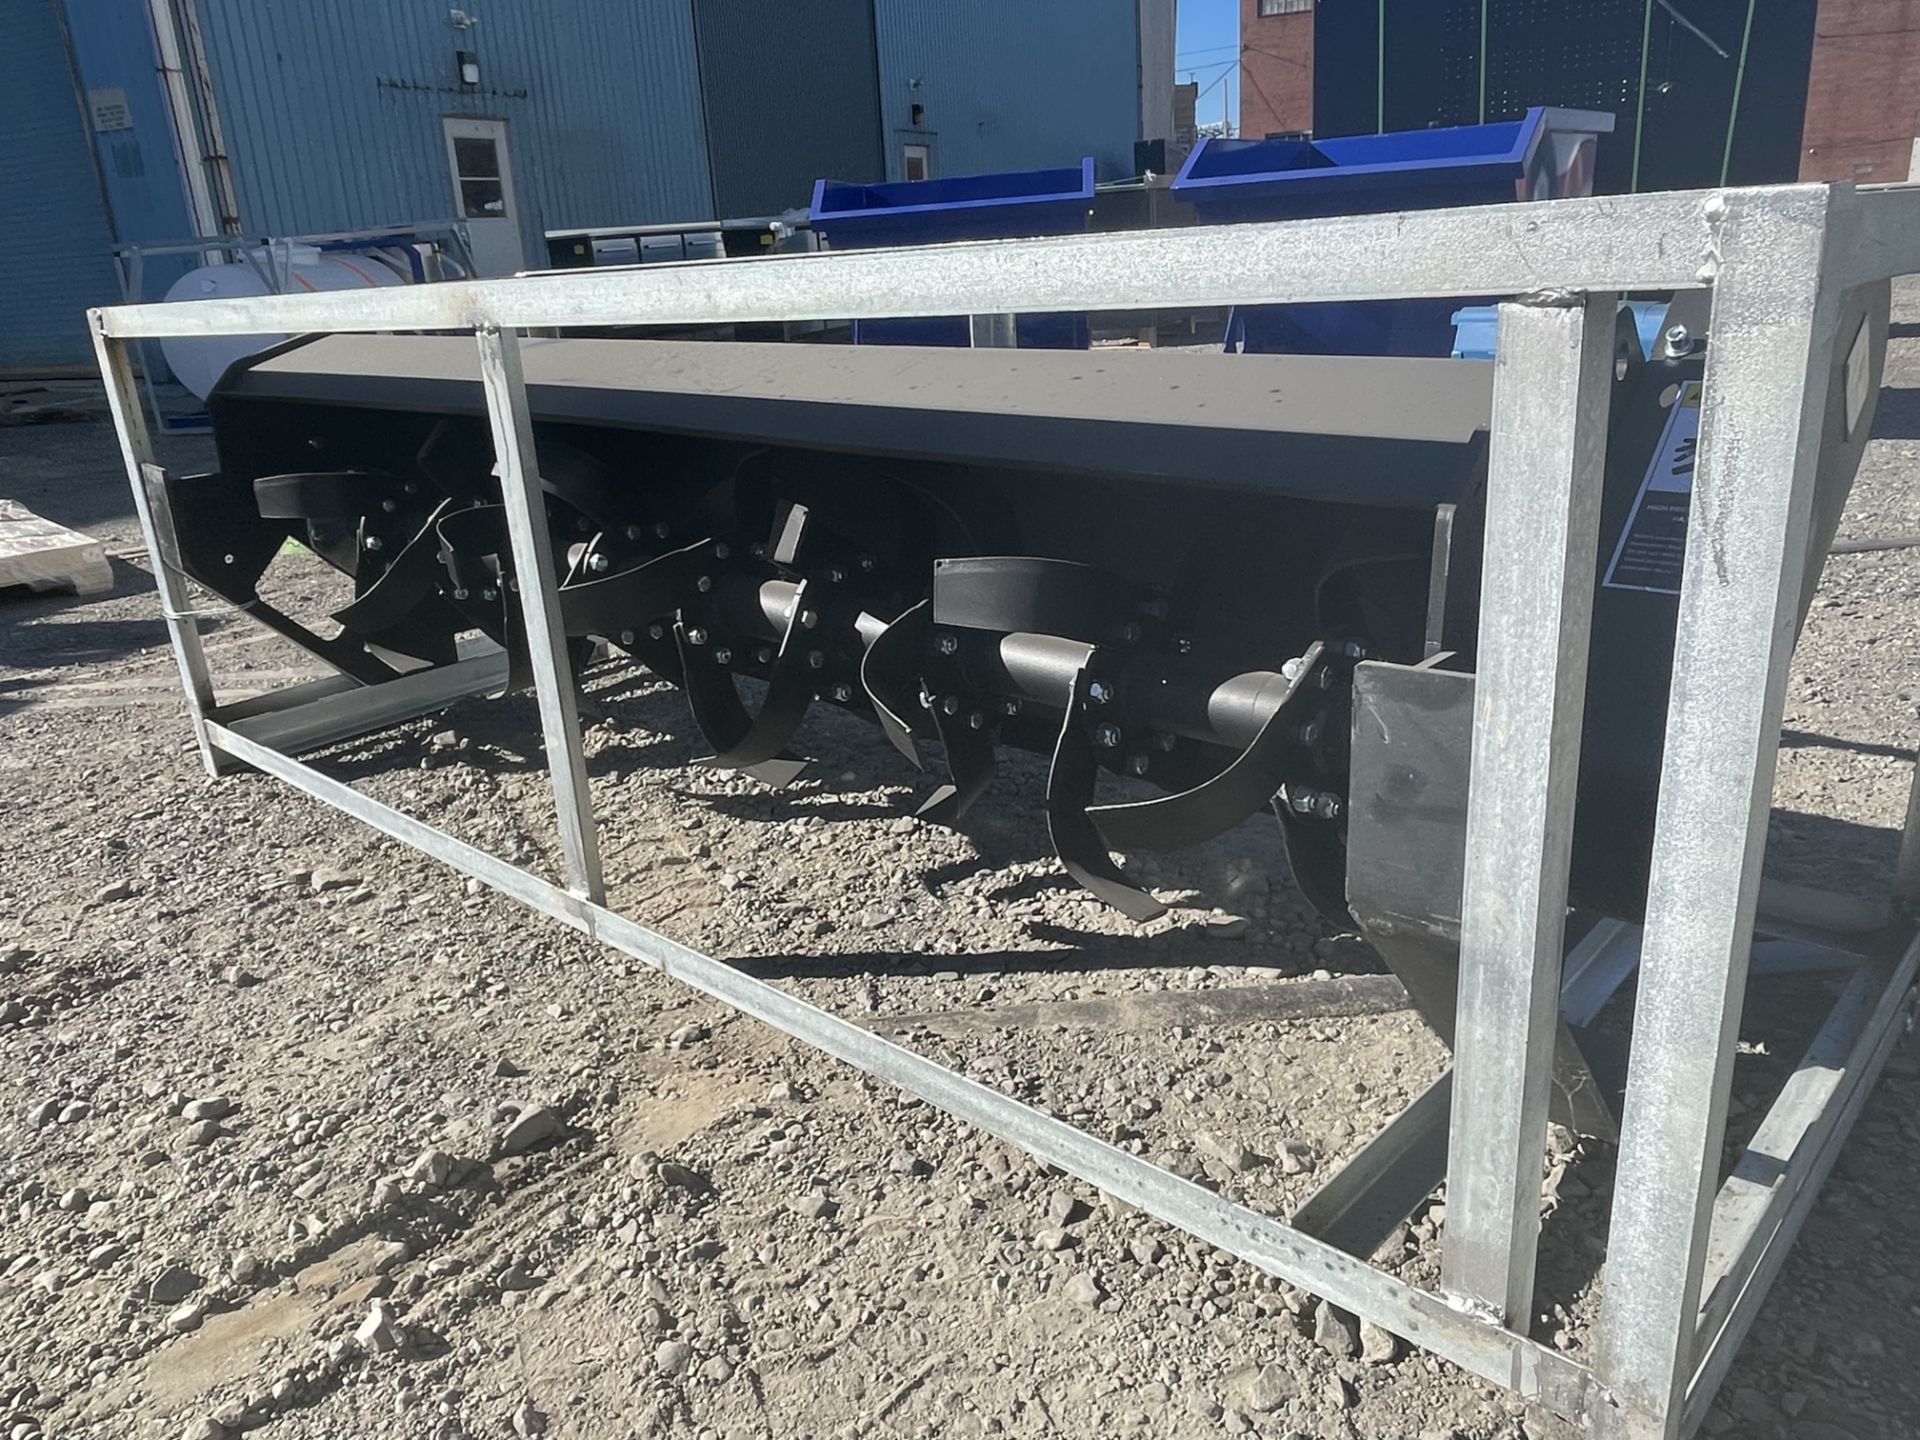 Brand New 72" Skid Steer Cultivator Attach.(NY139E) - Image 8 of 8